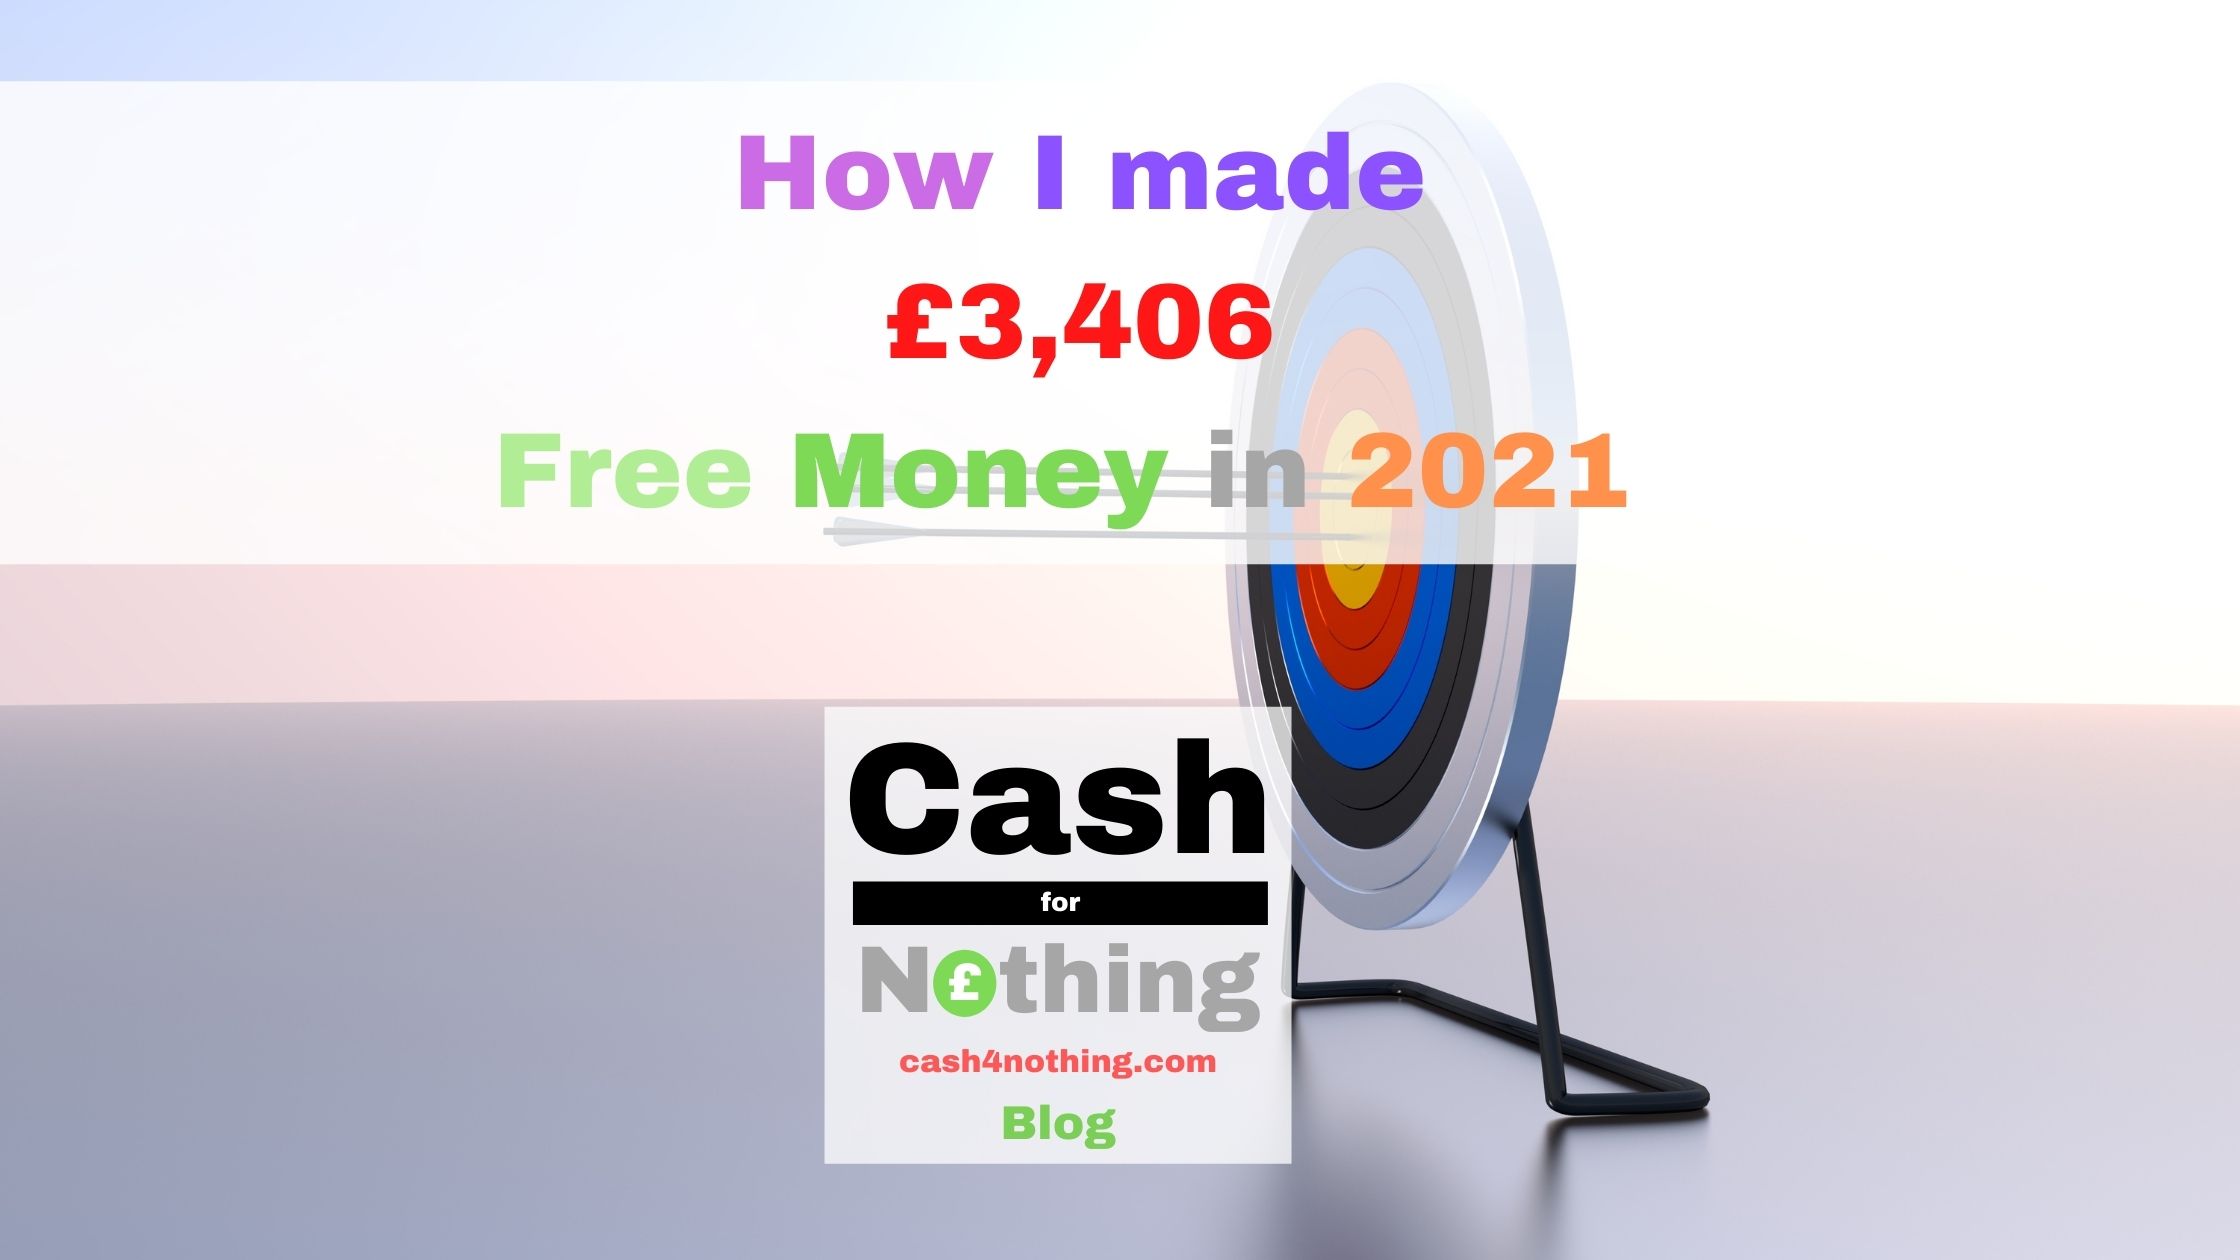 I made £3,406 Free Money in 2021